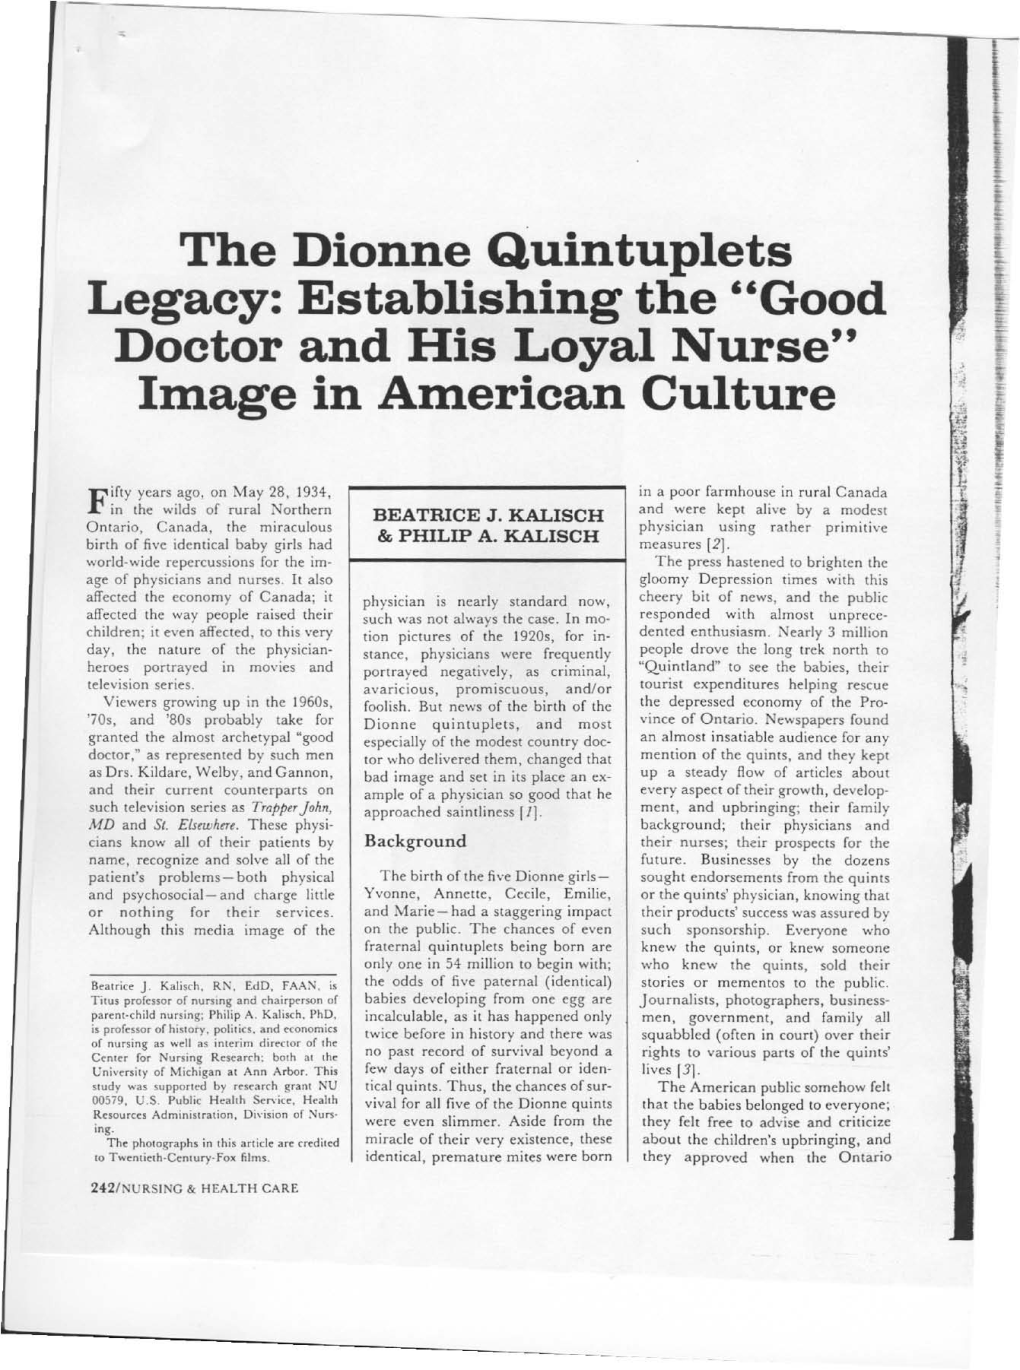 The Dionne Quintuplets Legacy: Establishing the "Good Doctor and His Loyal Nurse" Image in American Culture